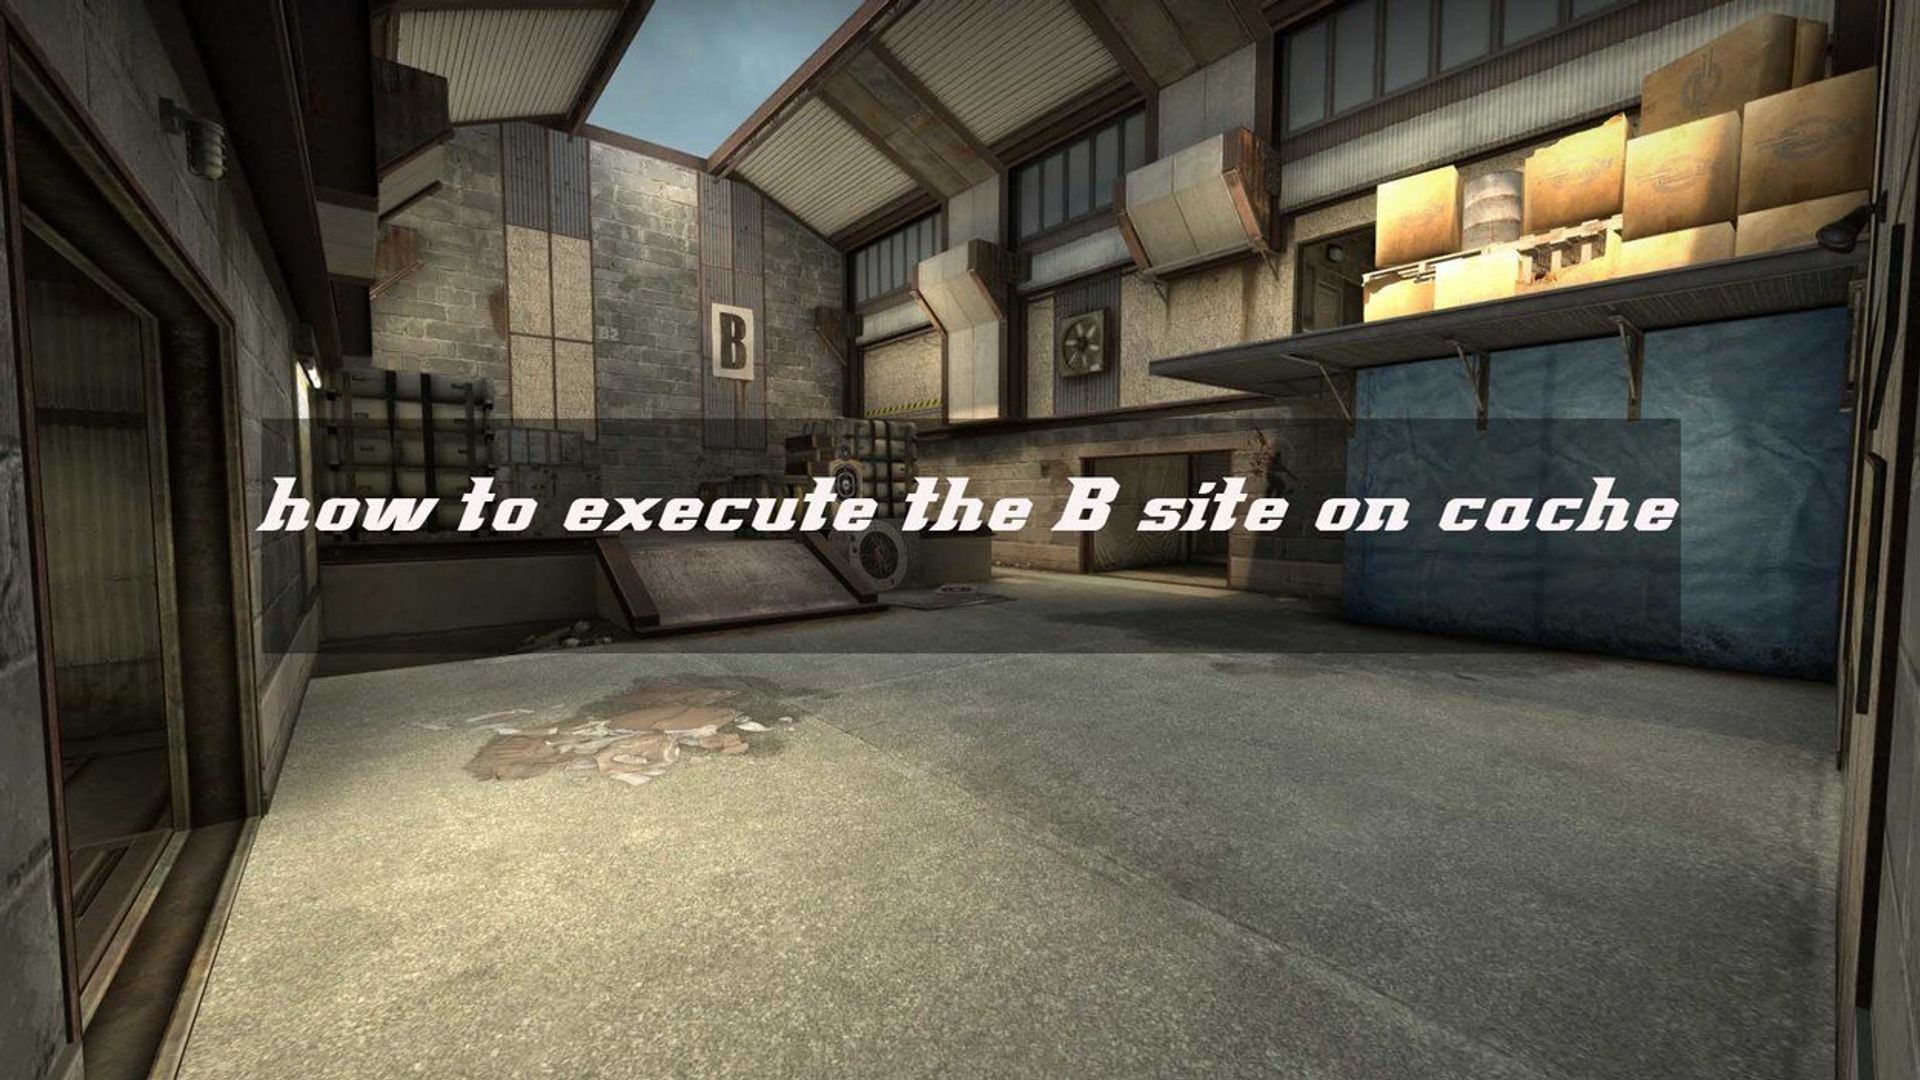 How to Execute the B Site on Cache